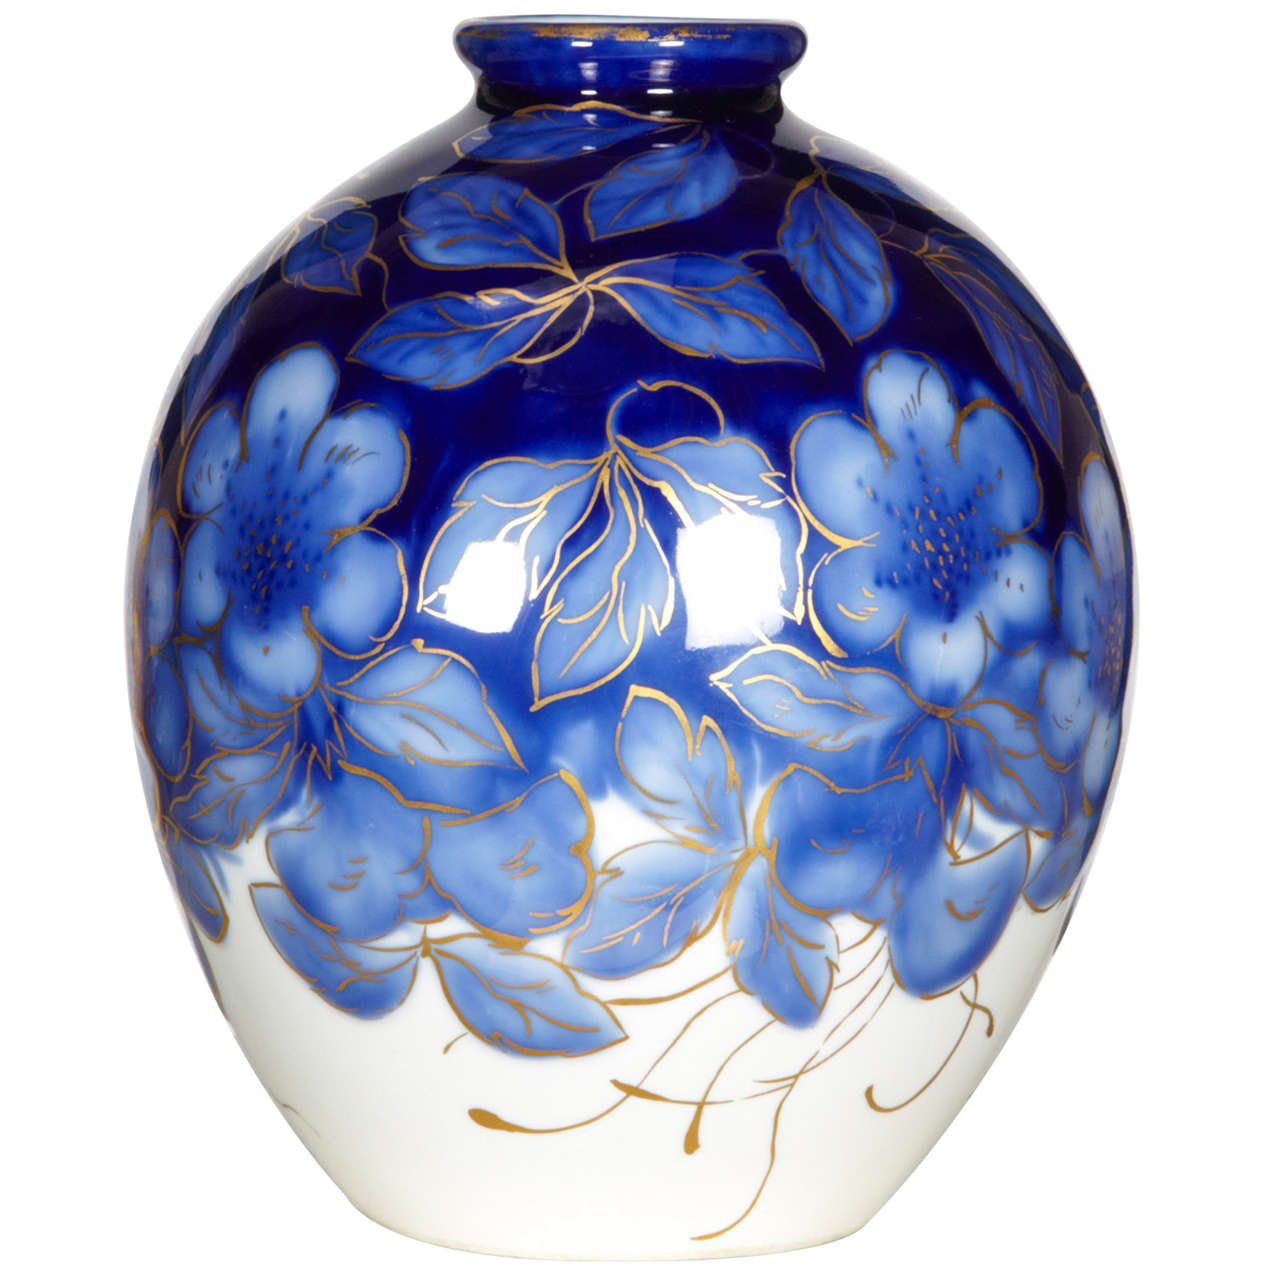 Vase by Camille Tharaud